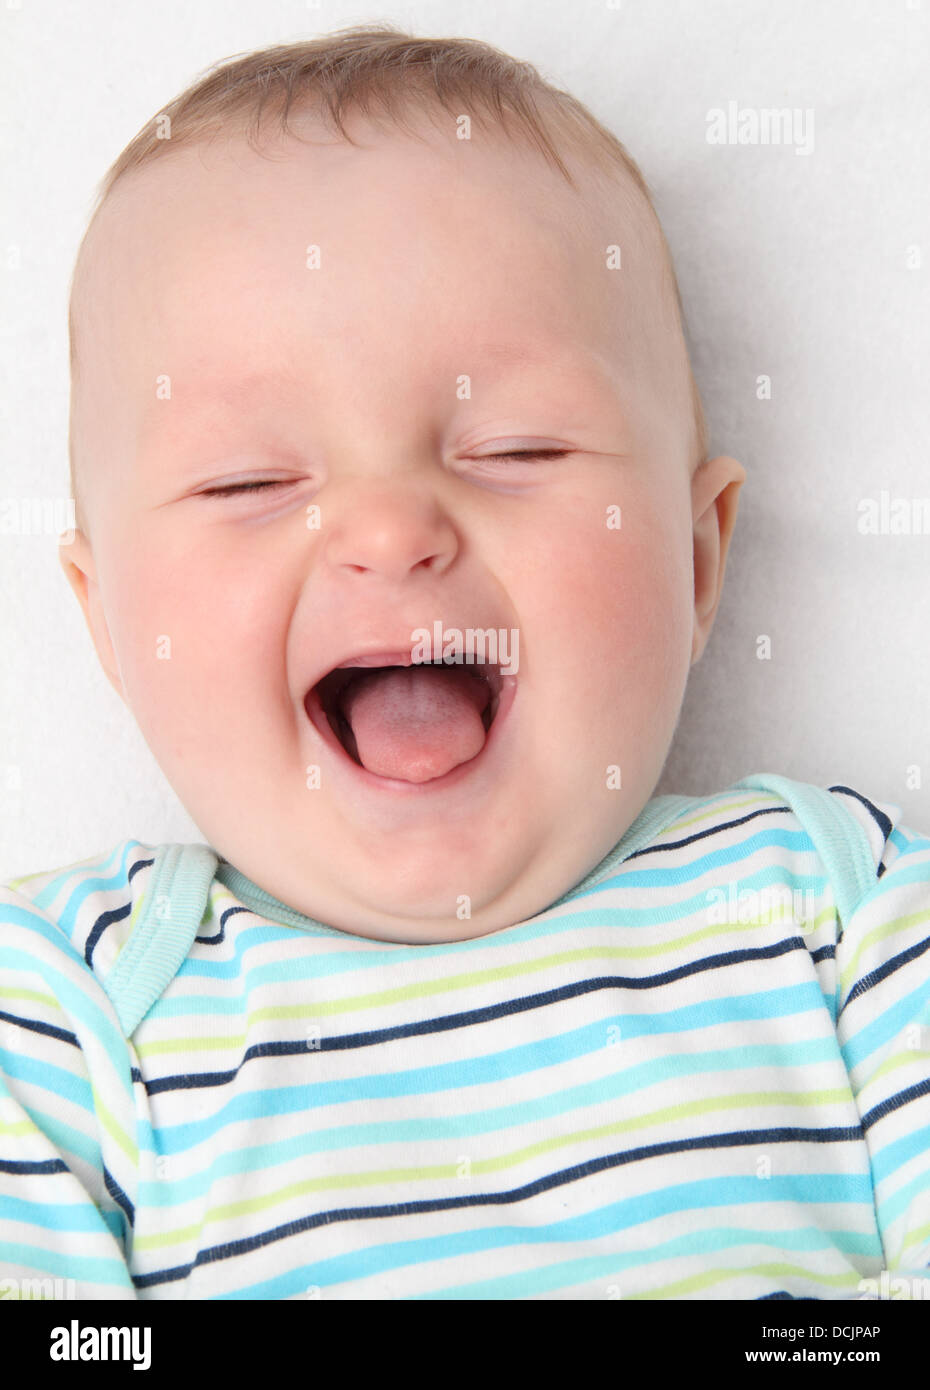 happy baby laughing Stock Photo